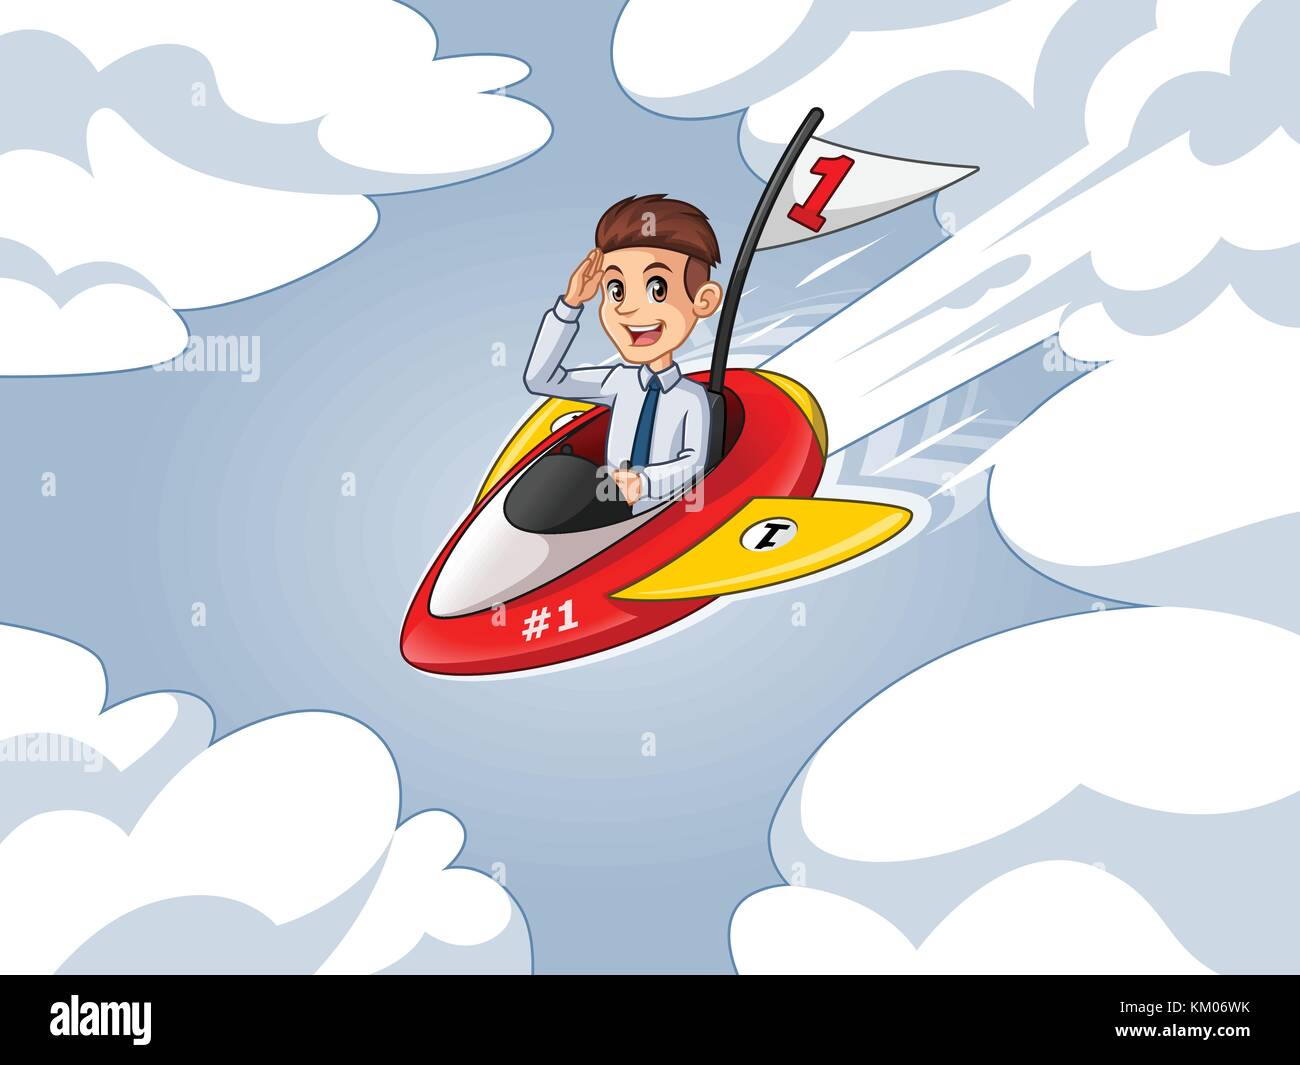 Businessman in shirt cartoon character design riding a rocket with number one flag flying through the sky, against blue background. Stock Vector